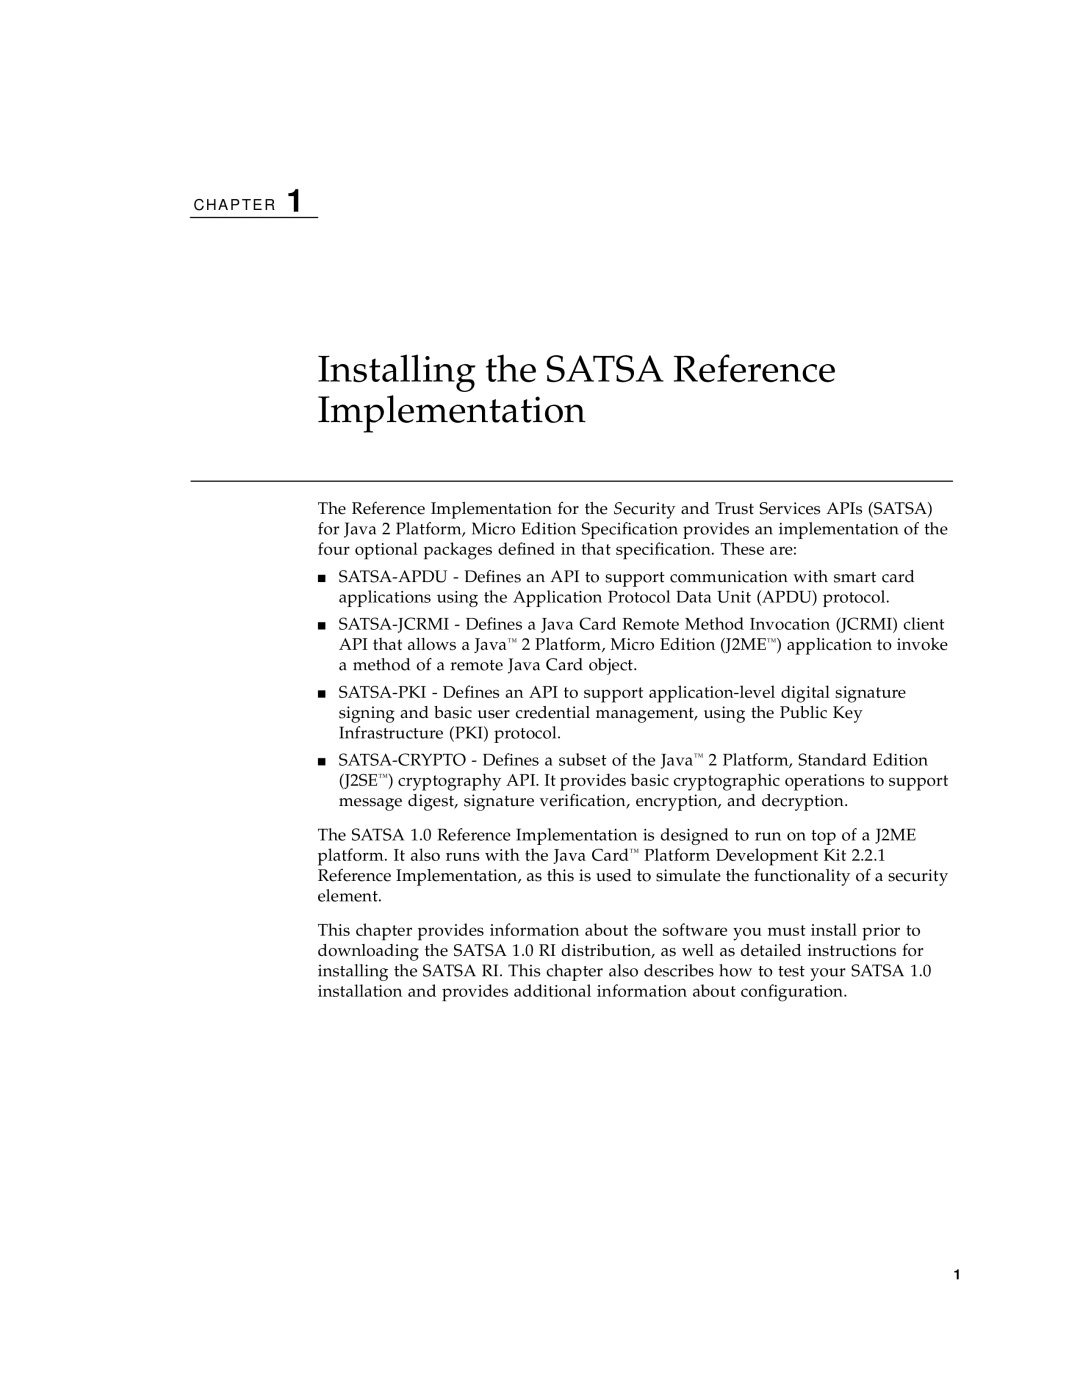 Sun Microsystems 1 manual Installing the SATSA Reference Implementation, C H A P T E R 